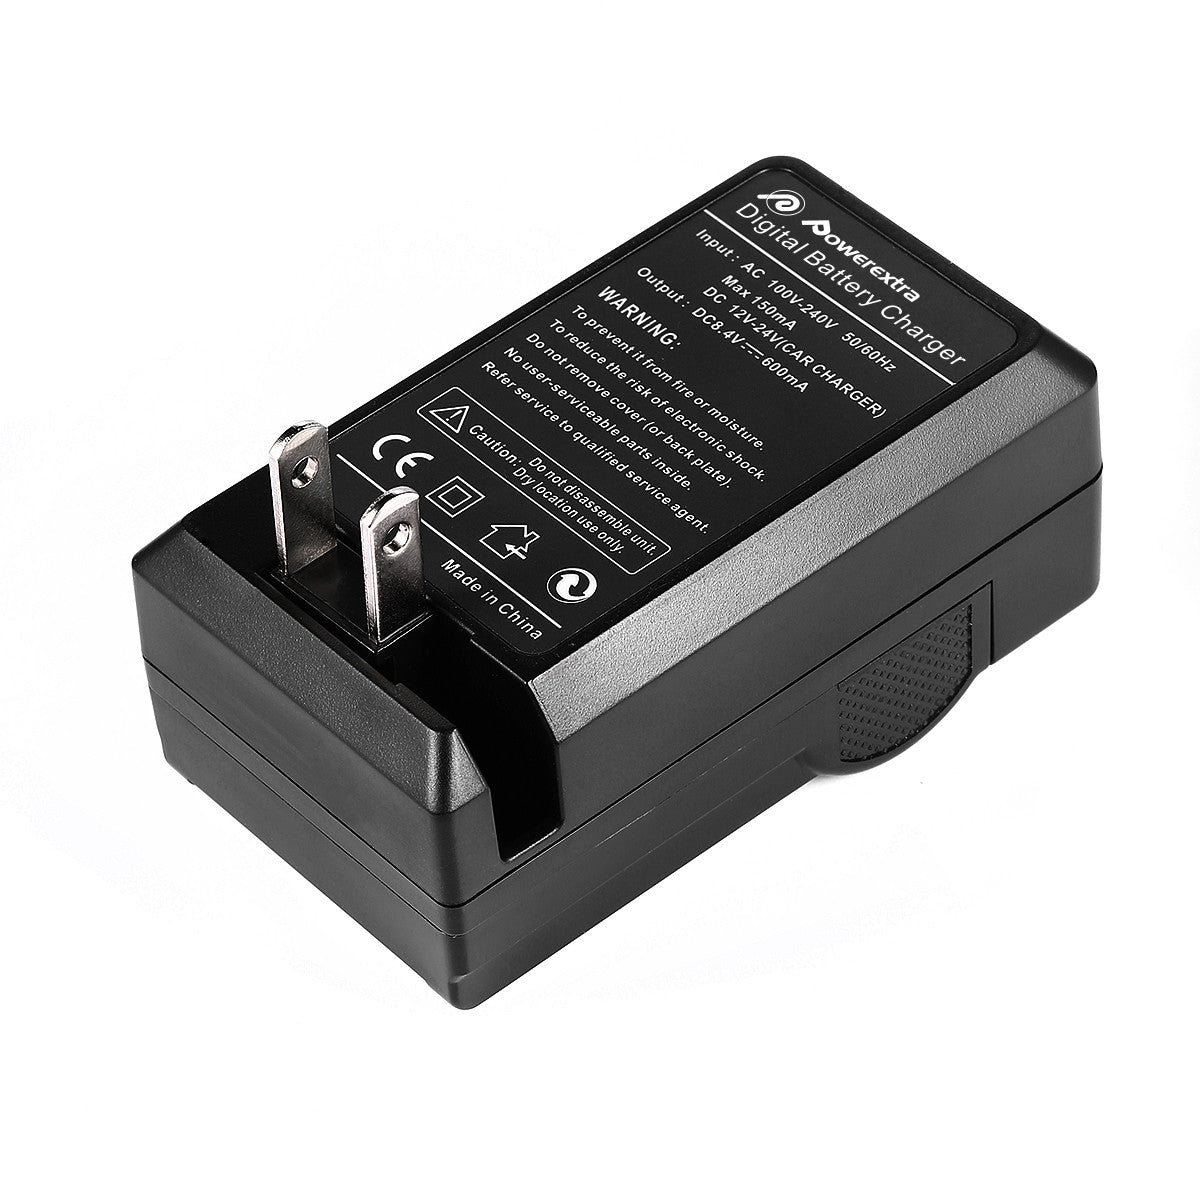 Powerextra LP-E5 Battery Charger For Canon Camera